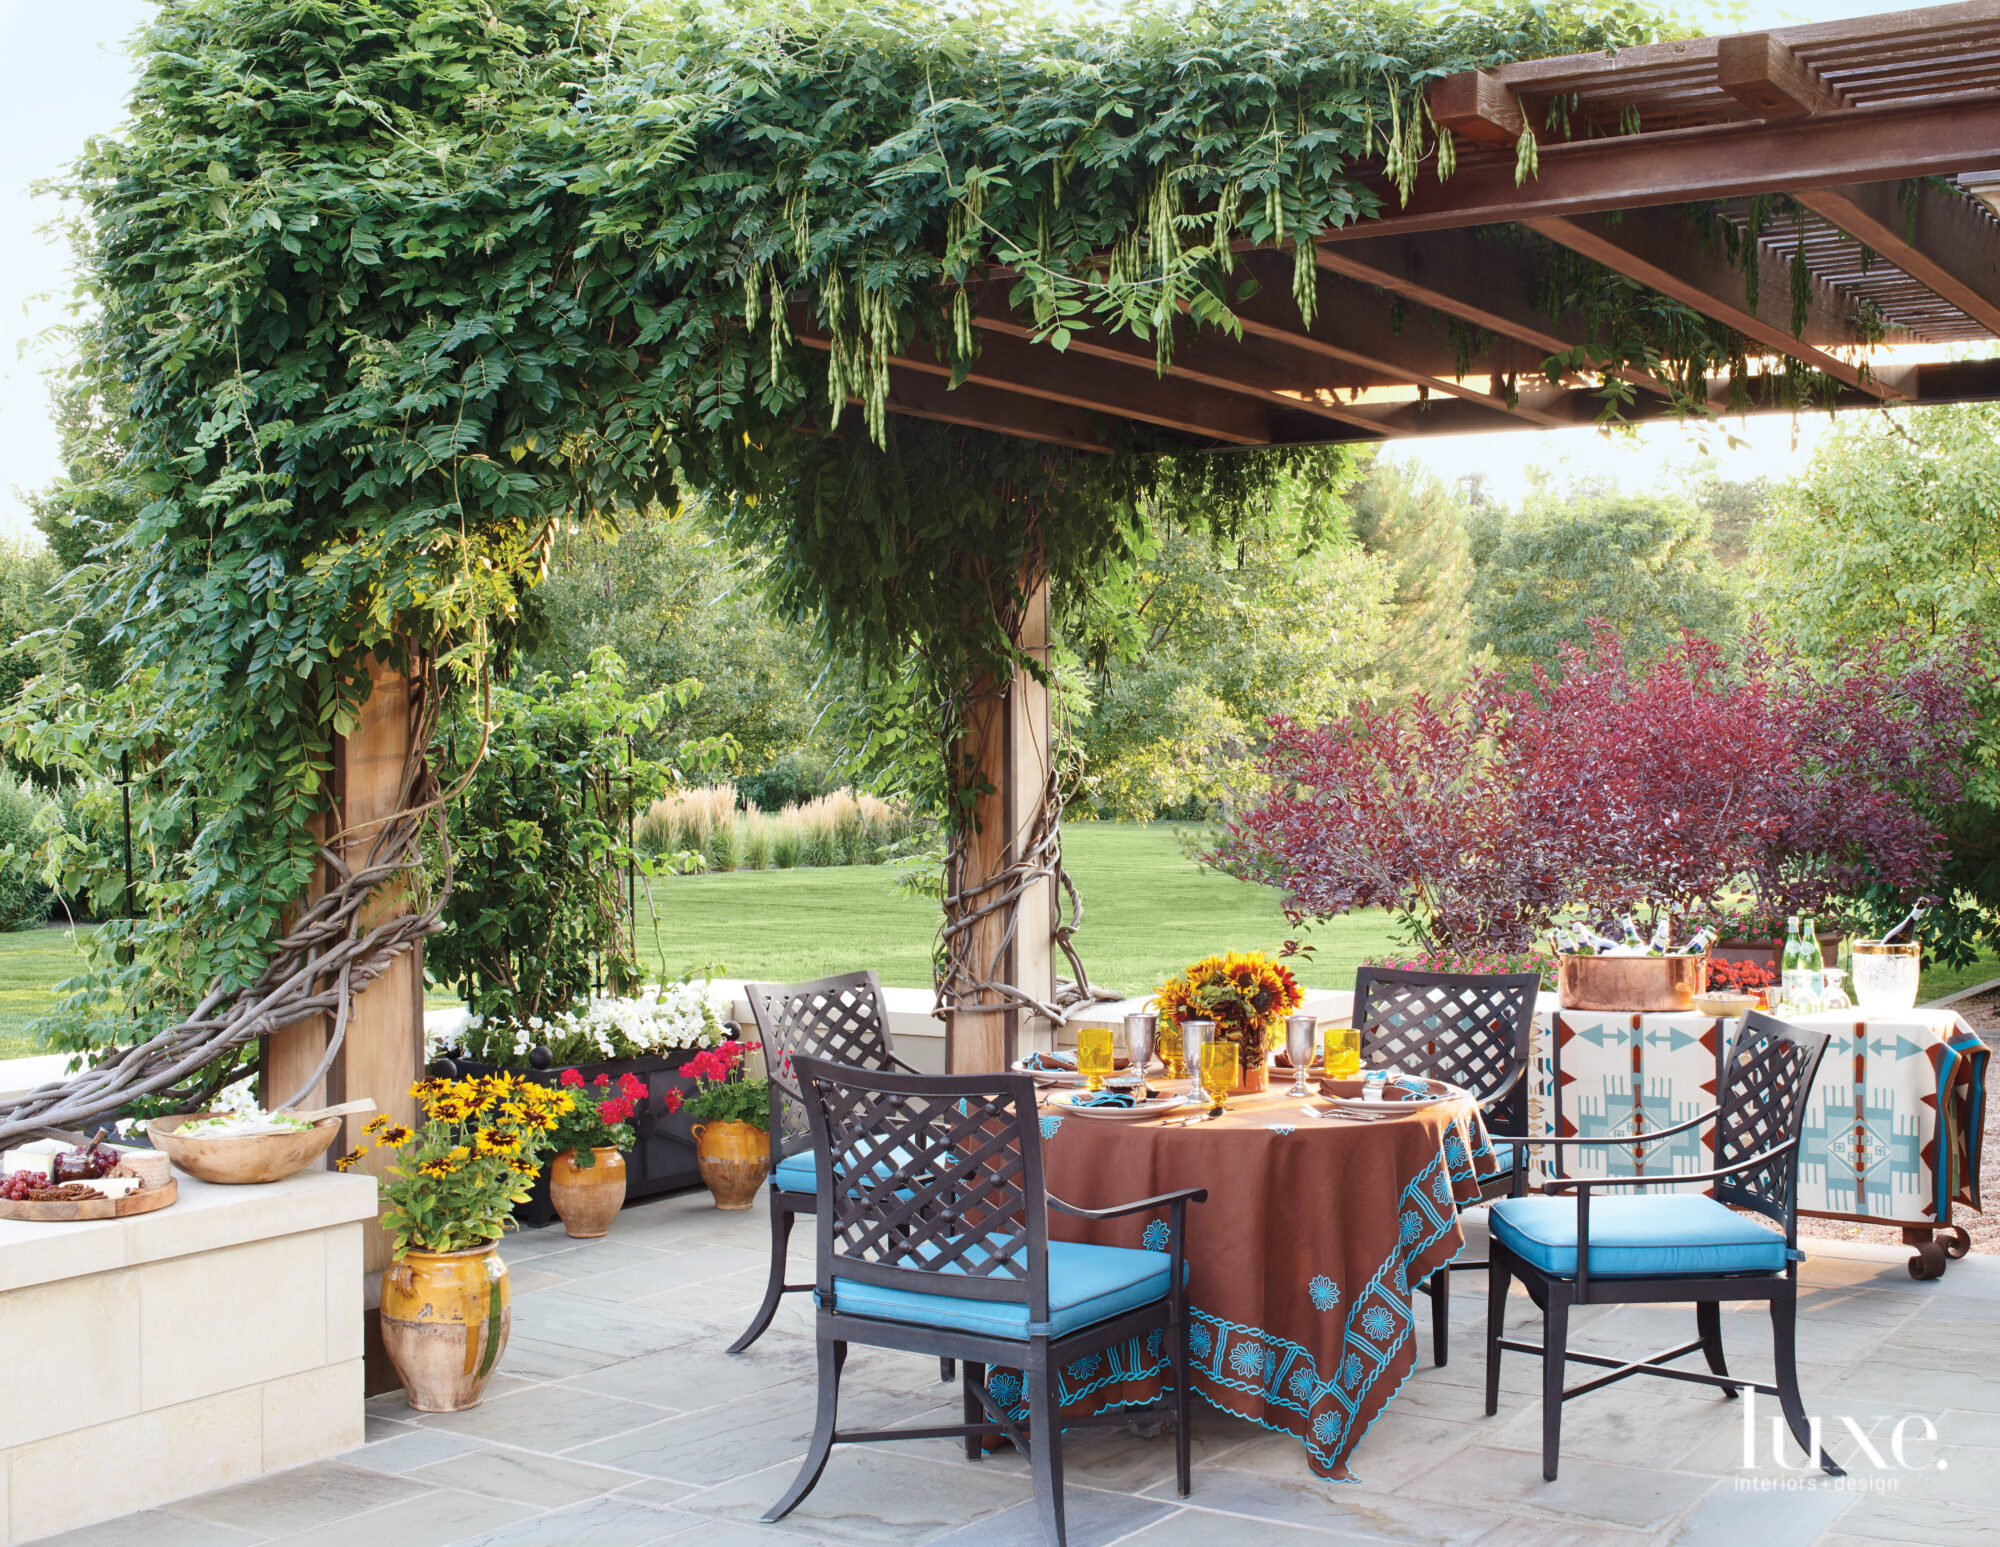 A terrace is shaded by a thick, green vine. It's outfitted with an outdoor table and chairs dressed in blue-and-brown textiles.